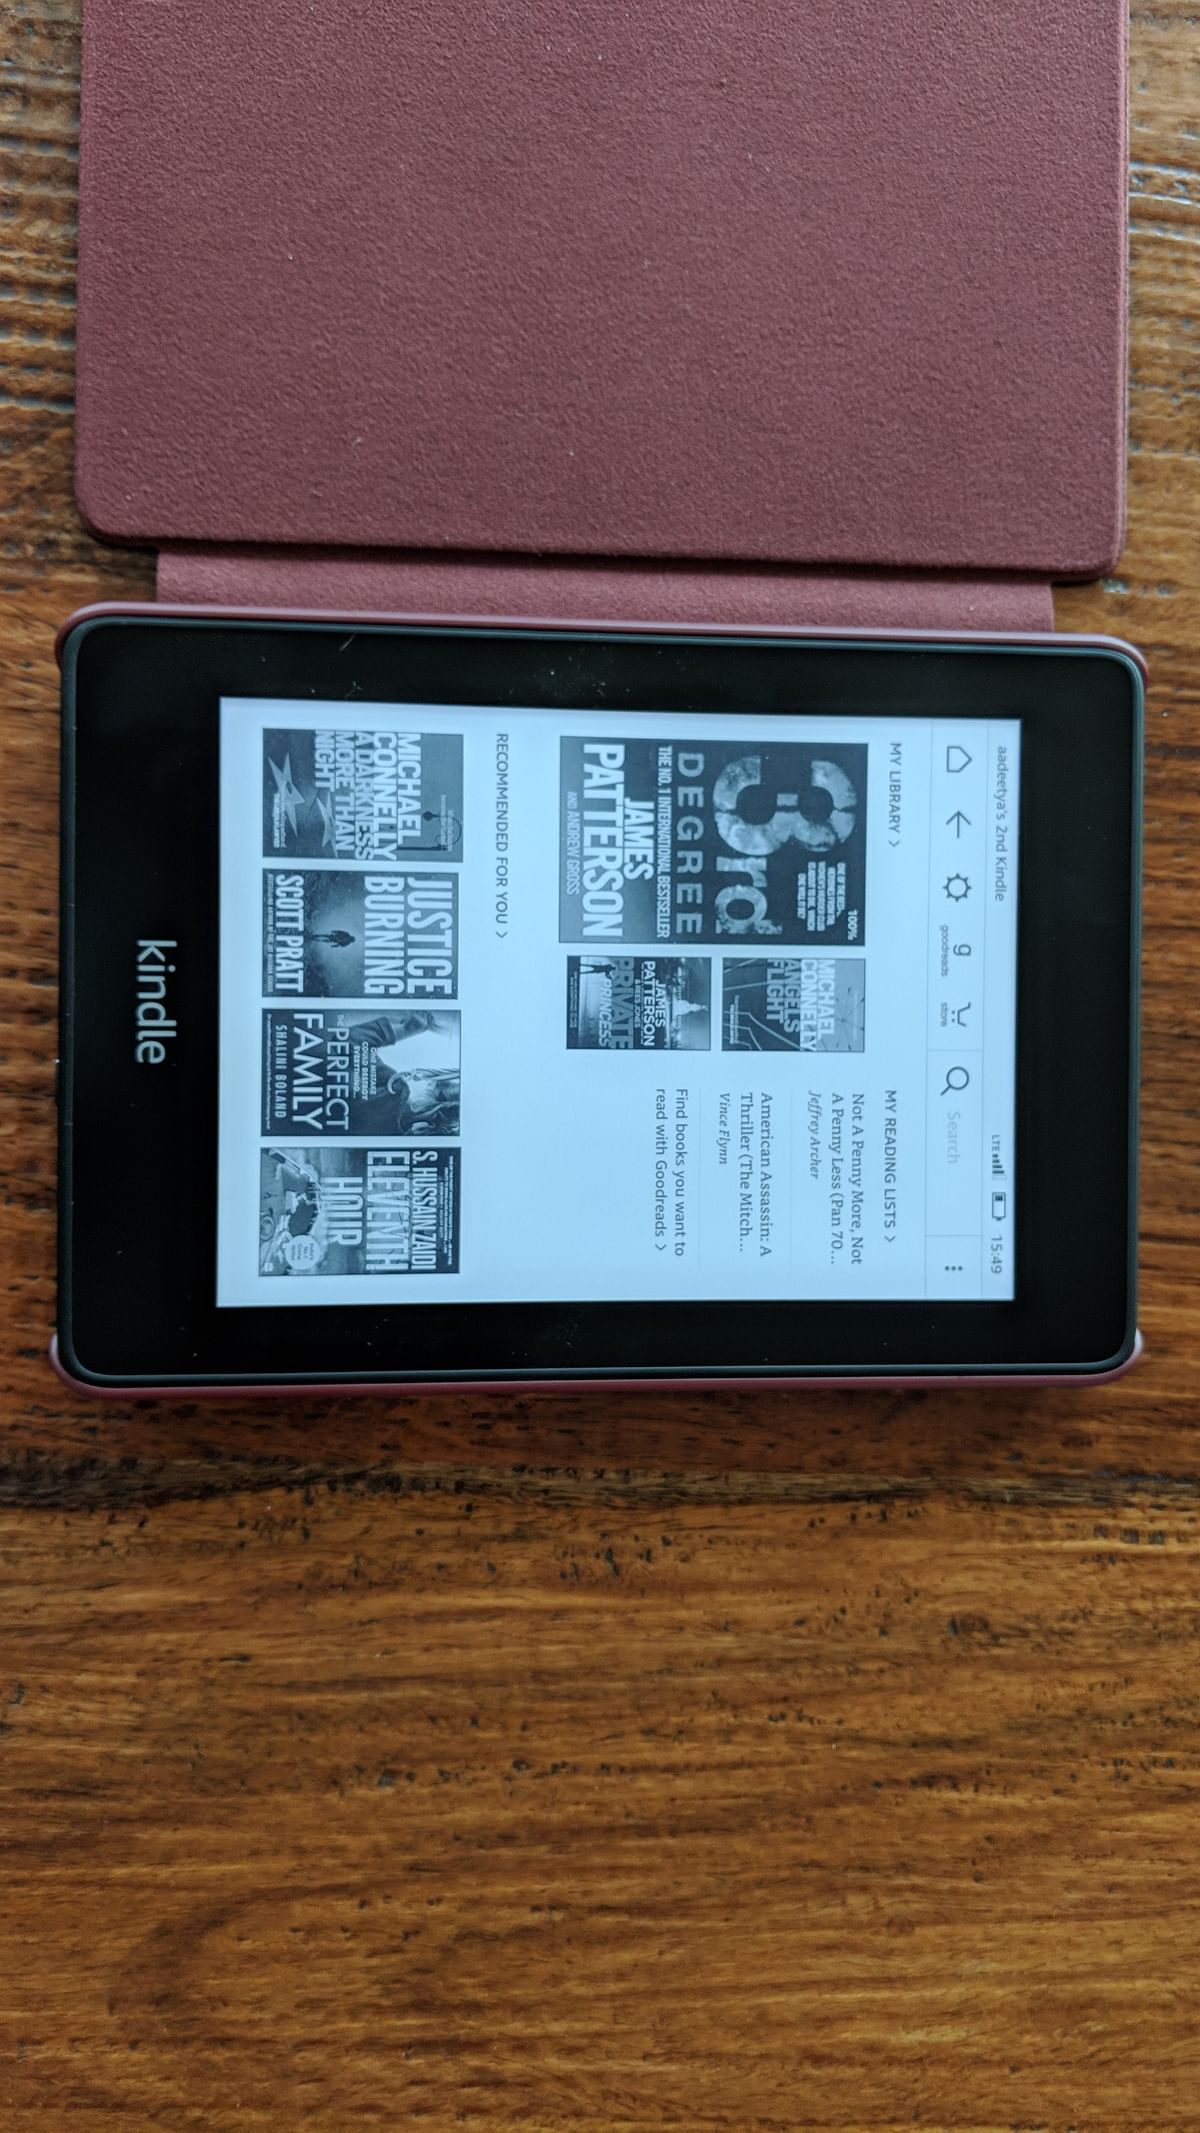 The latest Kindle Paperwhite series from Amazon is now water resistant and supports 4G out of box.